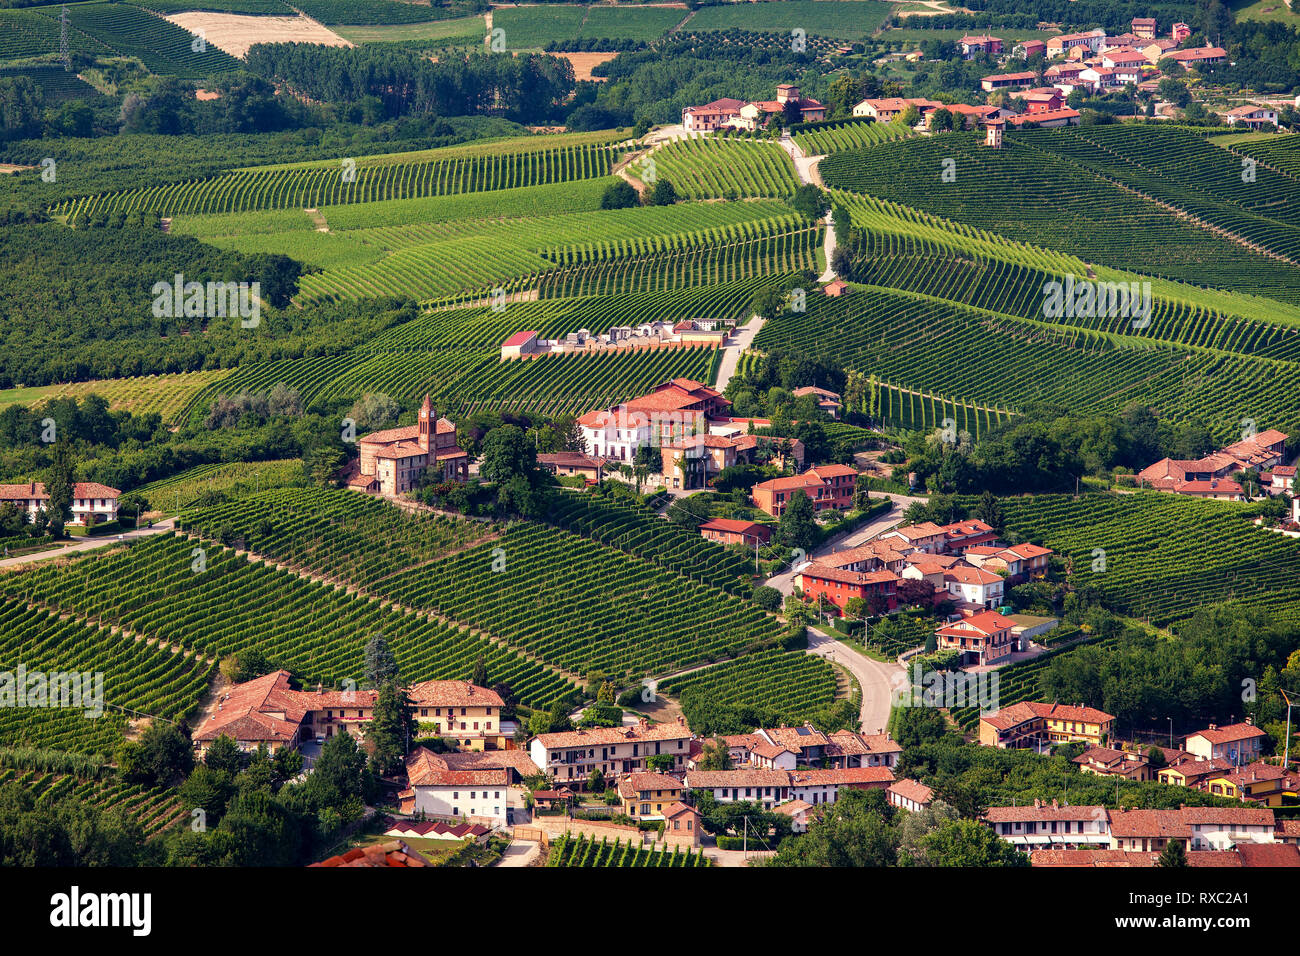 Small town among green vineyards on the hills in Piedmont, Northern Italy. Stock Photo